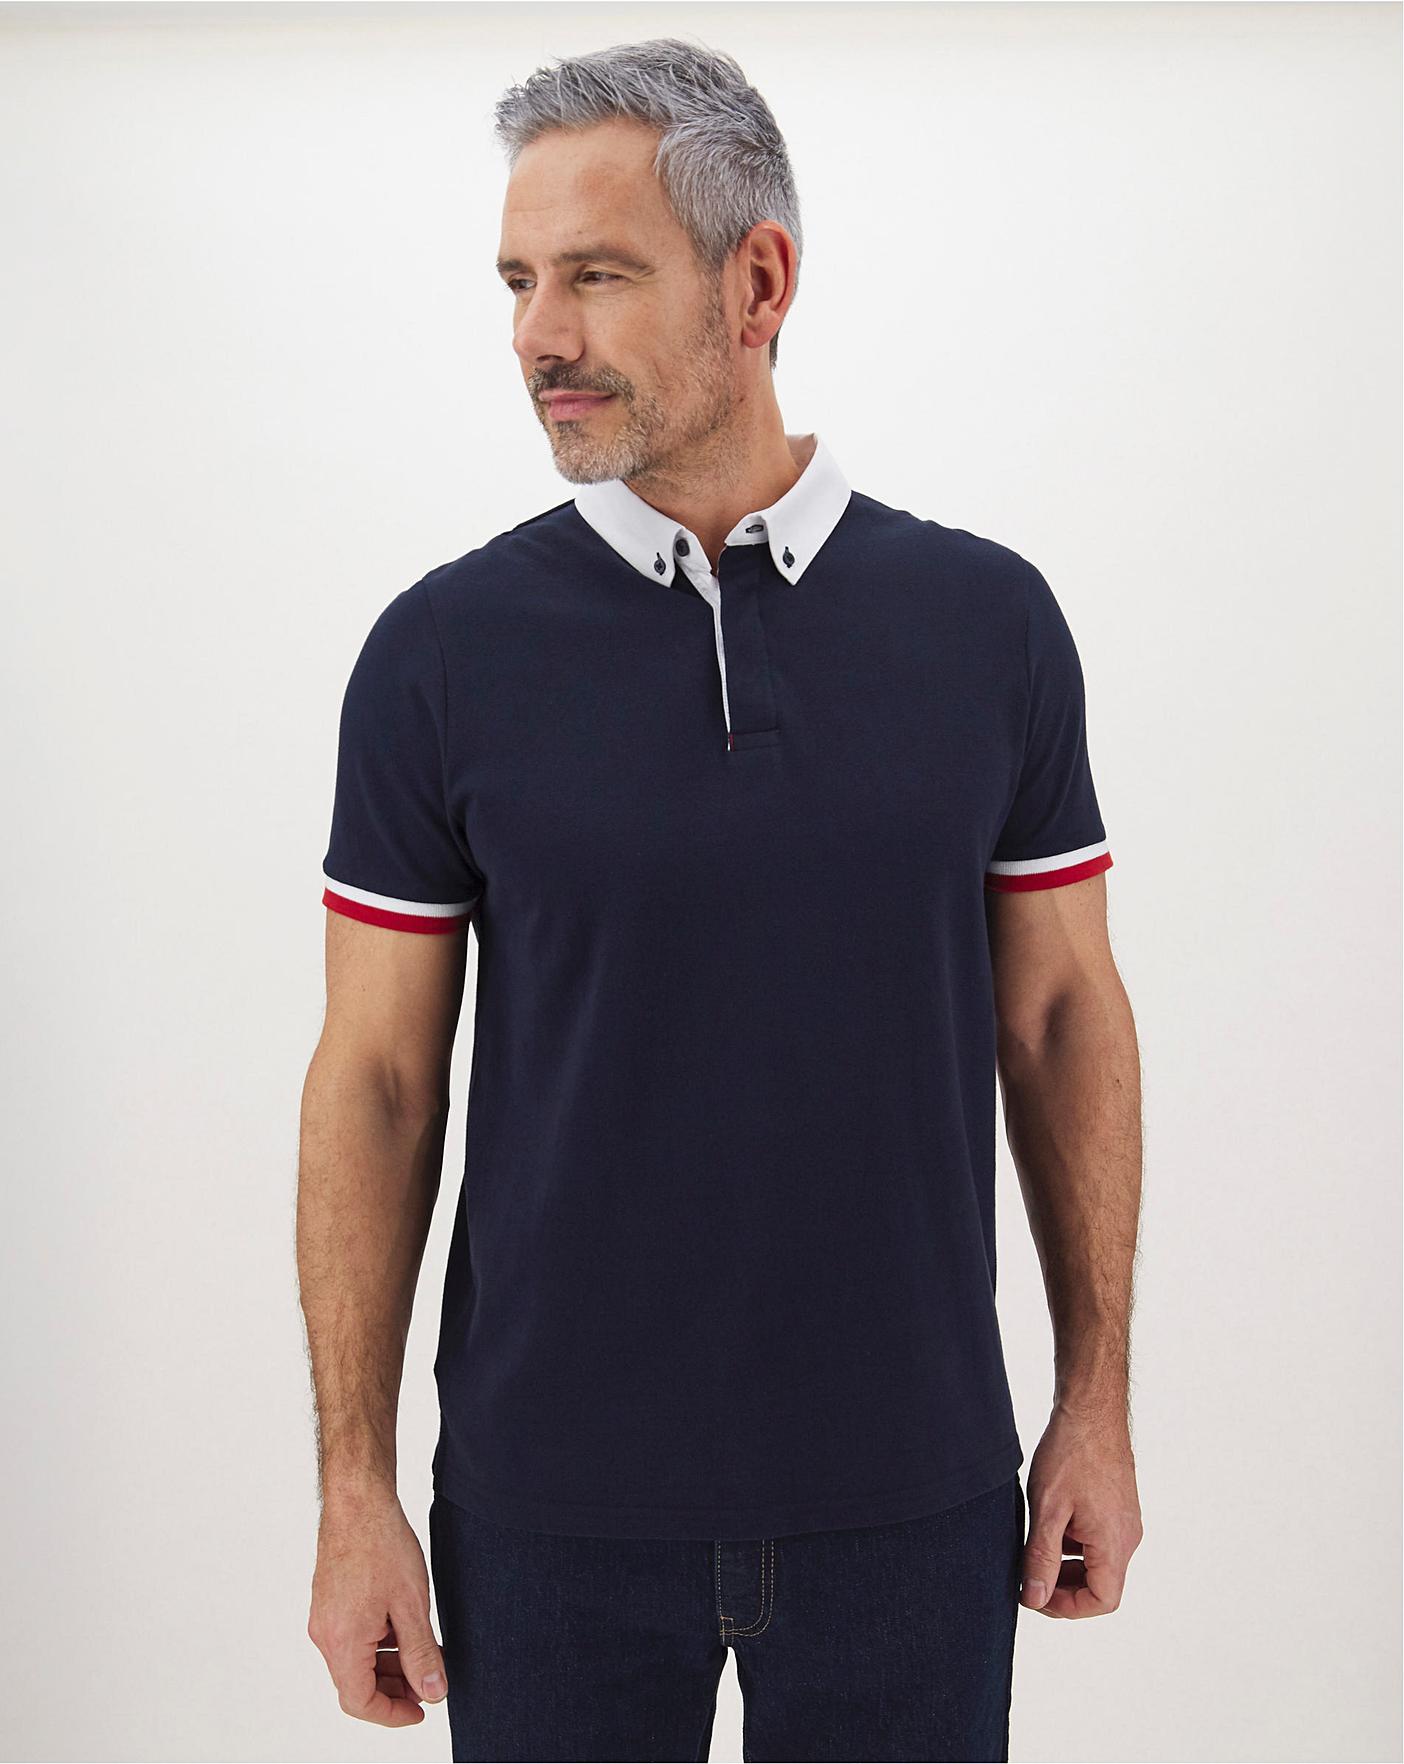 smart casual polo shirt and jeans